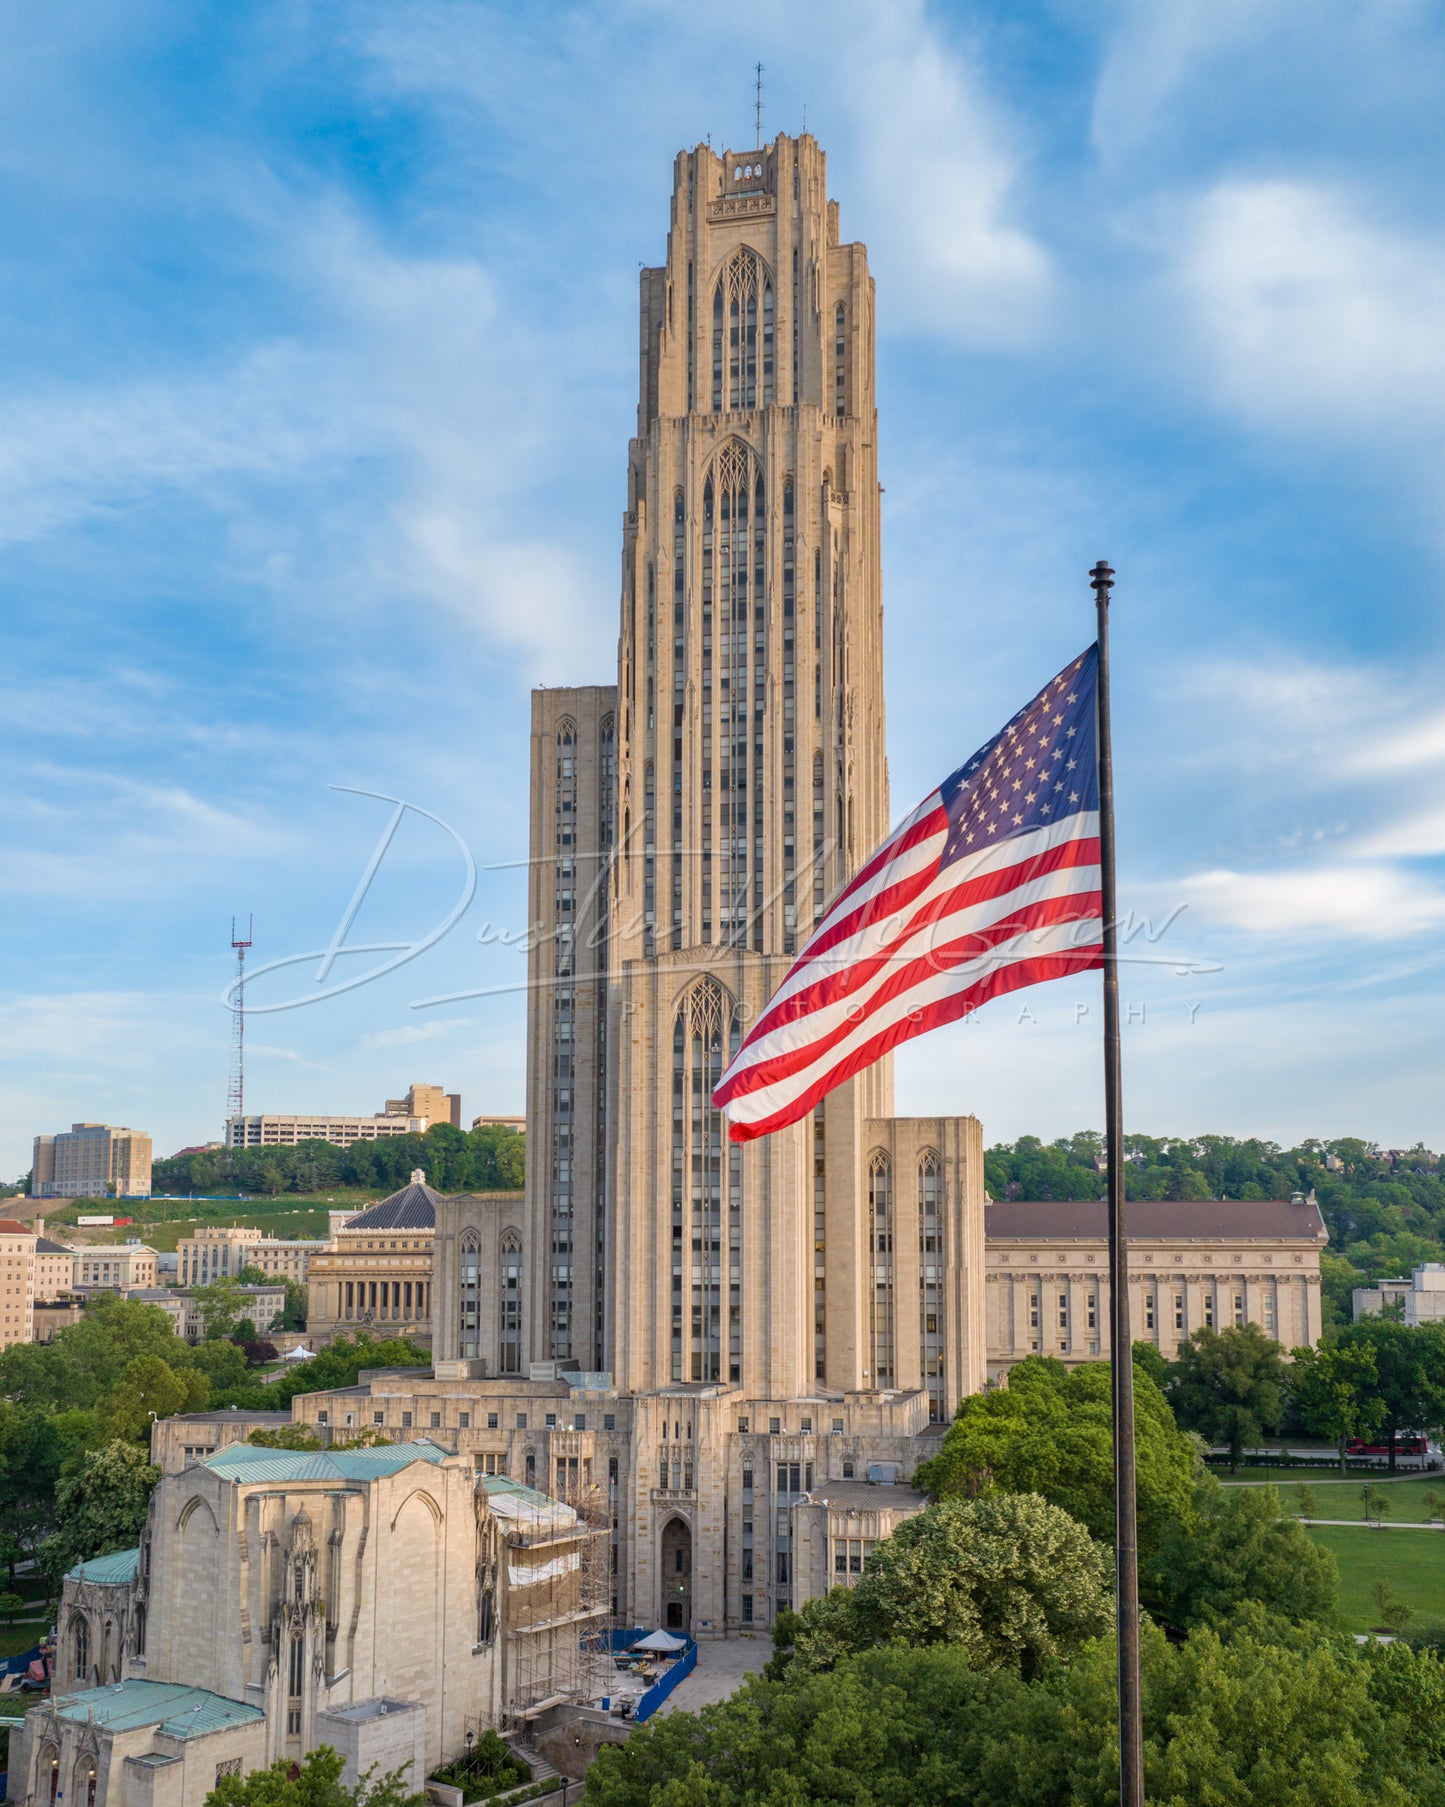 Cathedral of Learning and American Flag